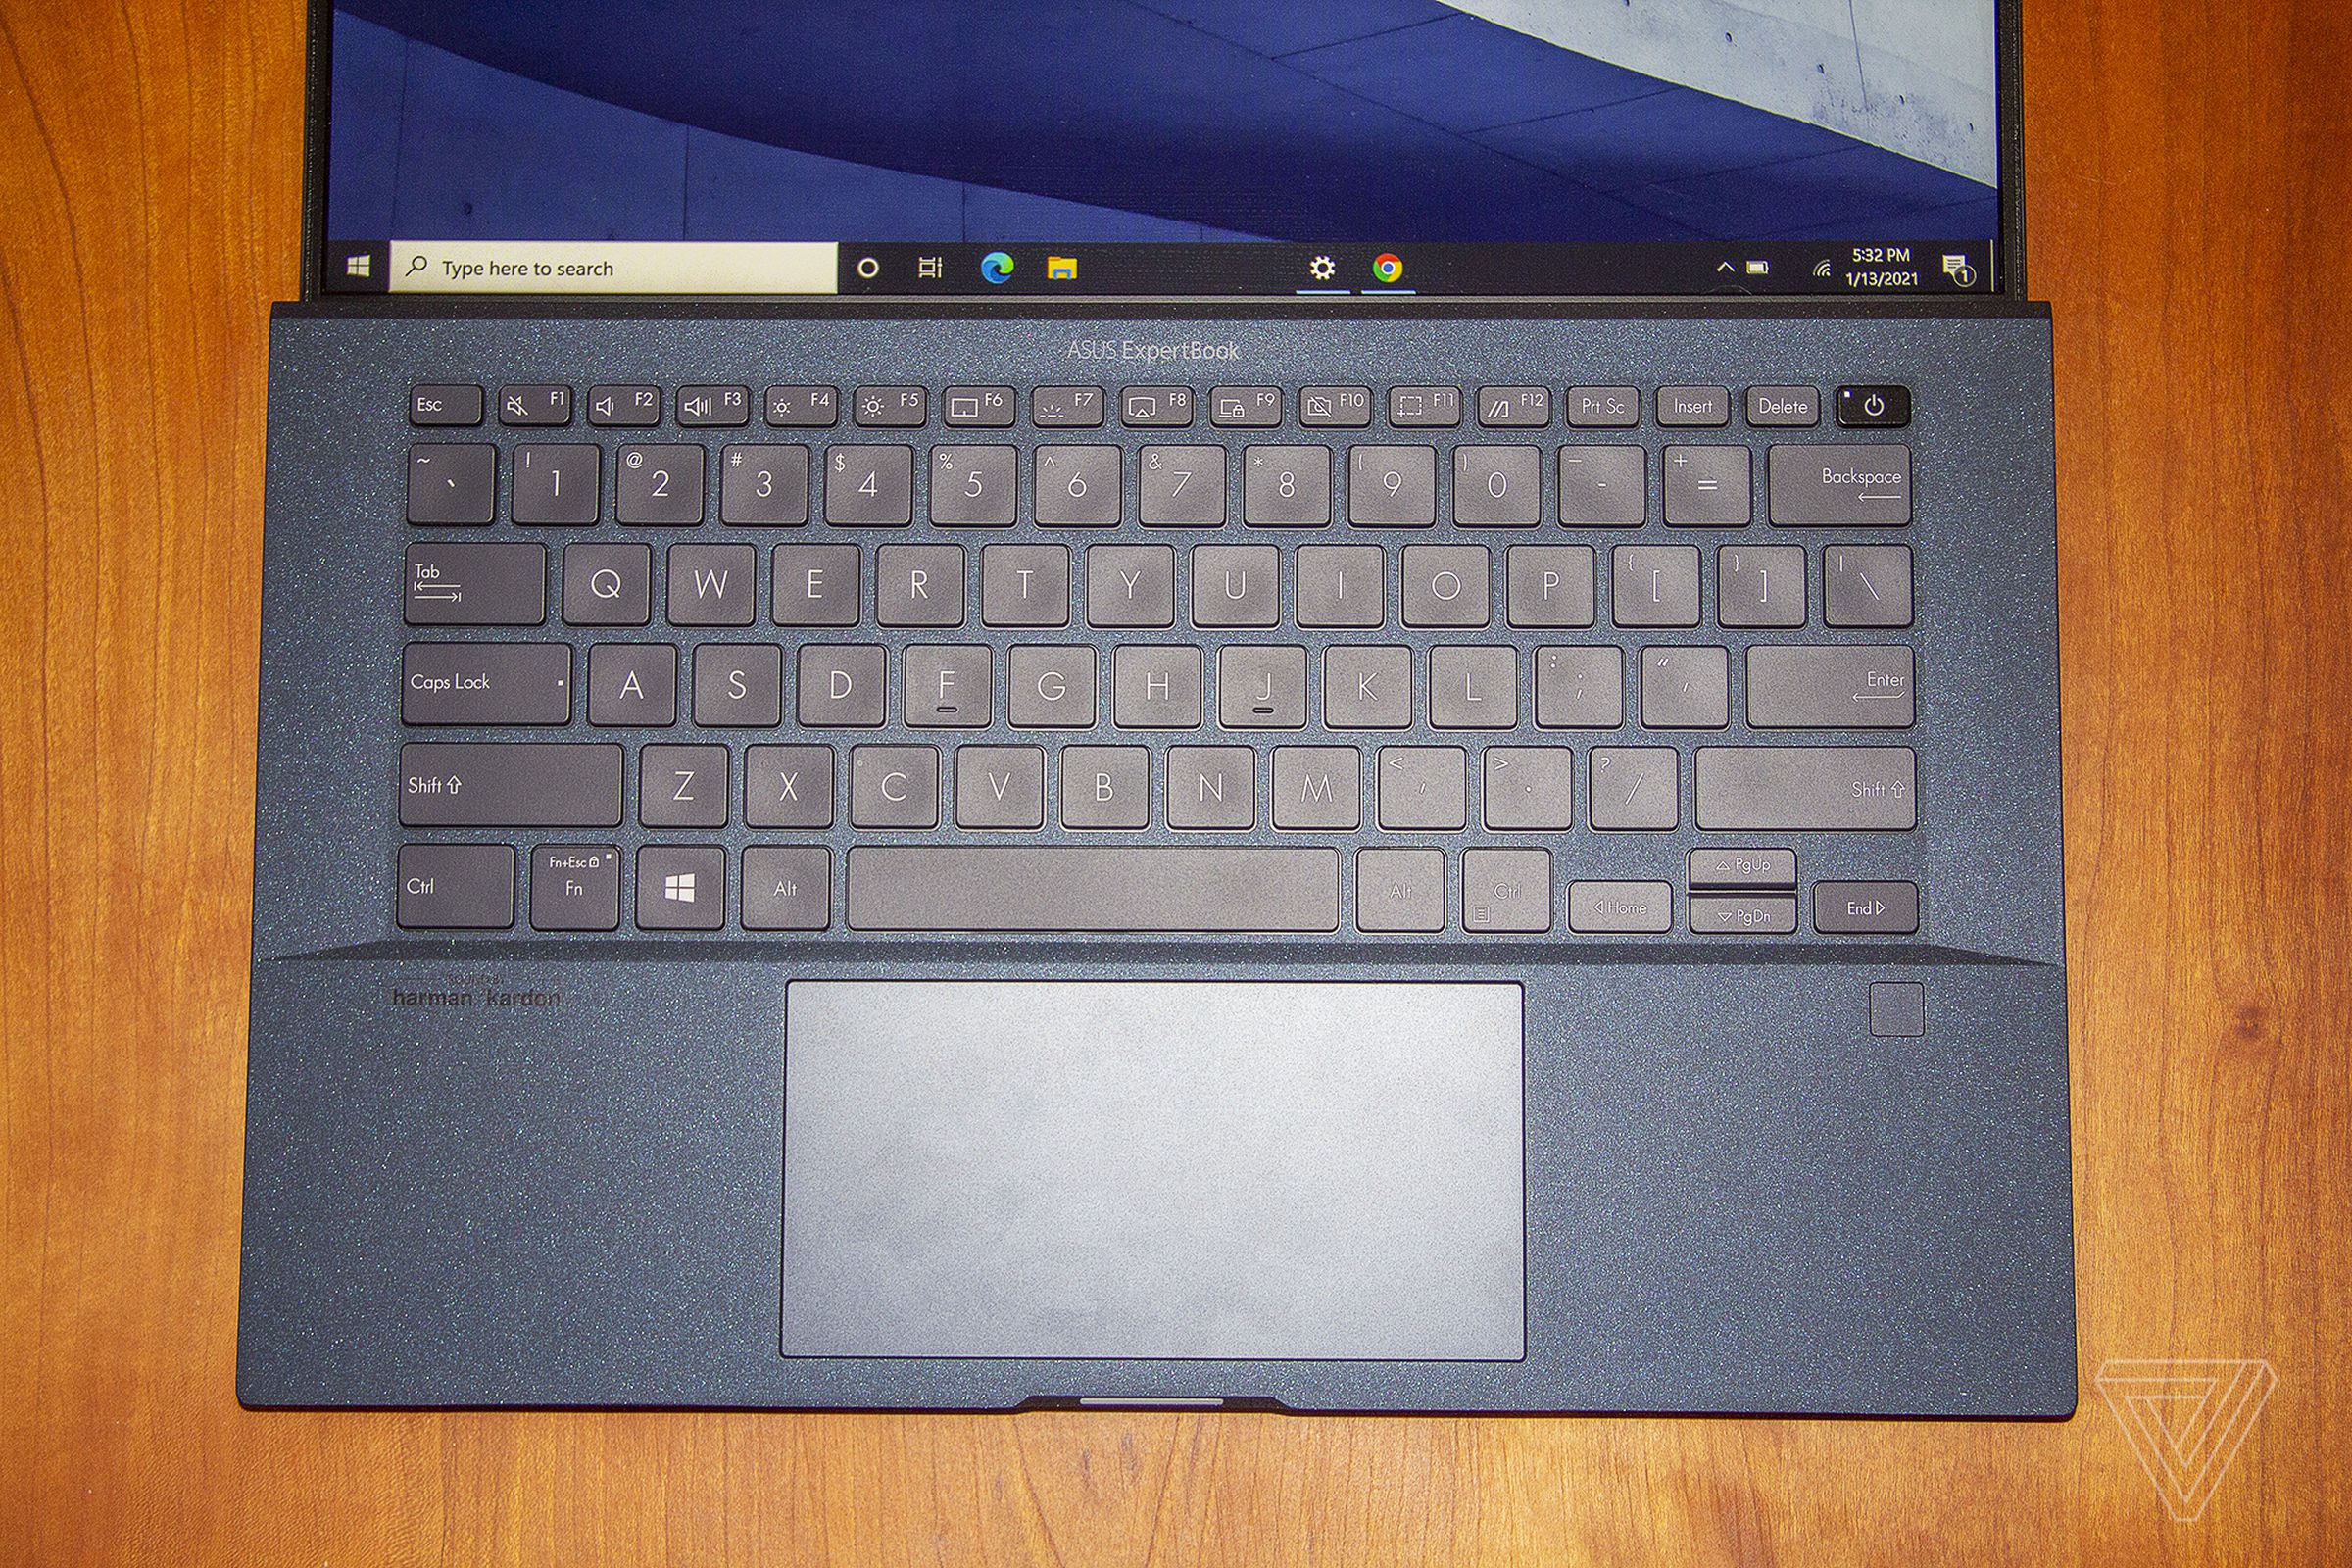 The Asus ExpertBook B9450 keyboard seen from above.